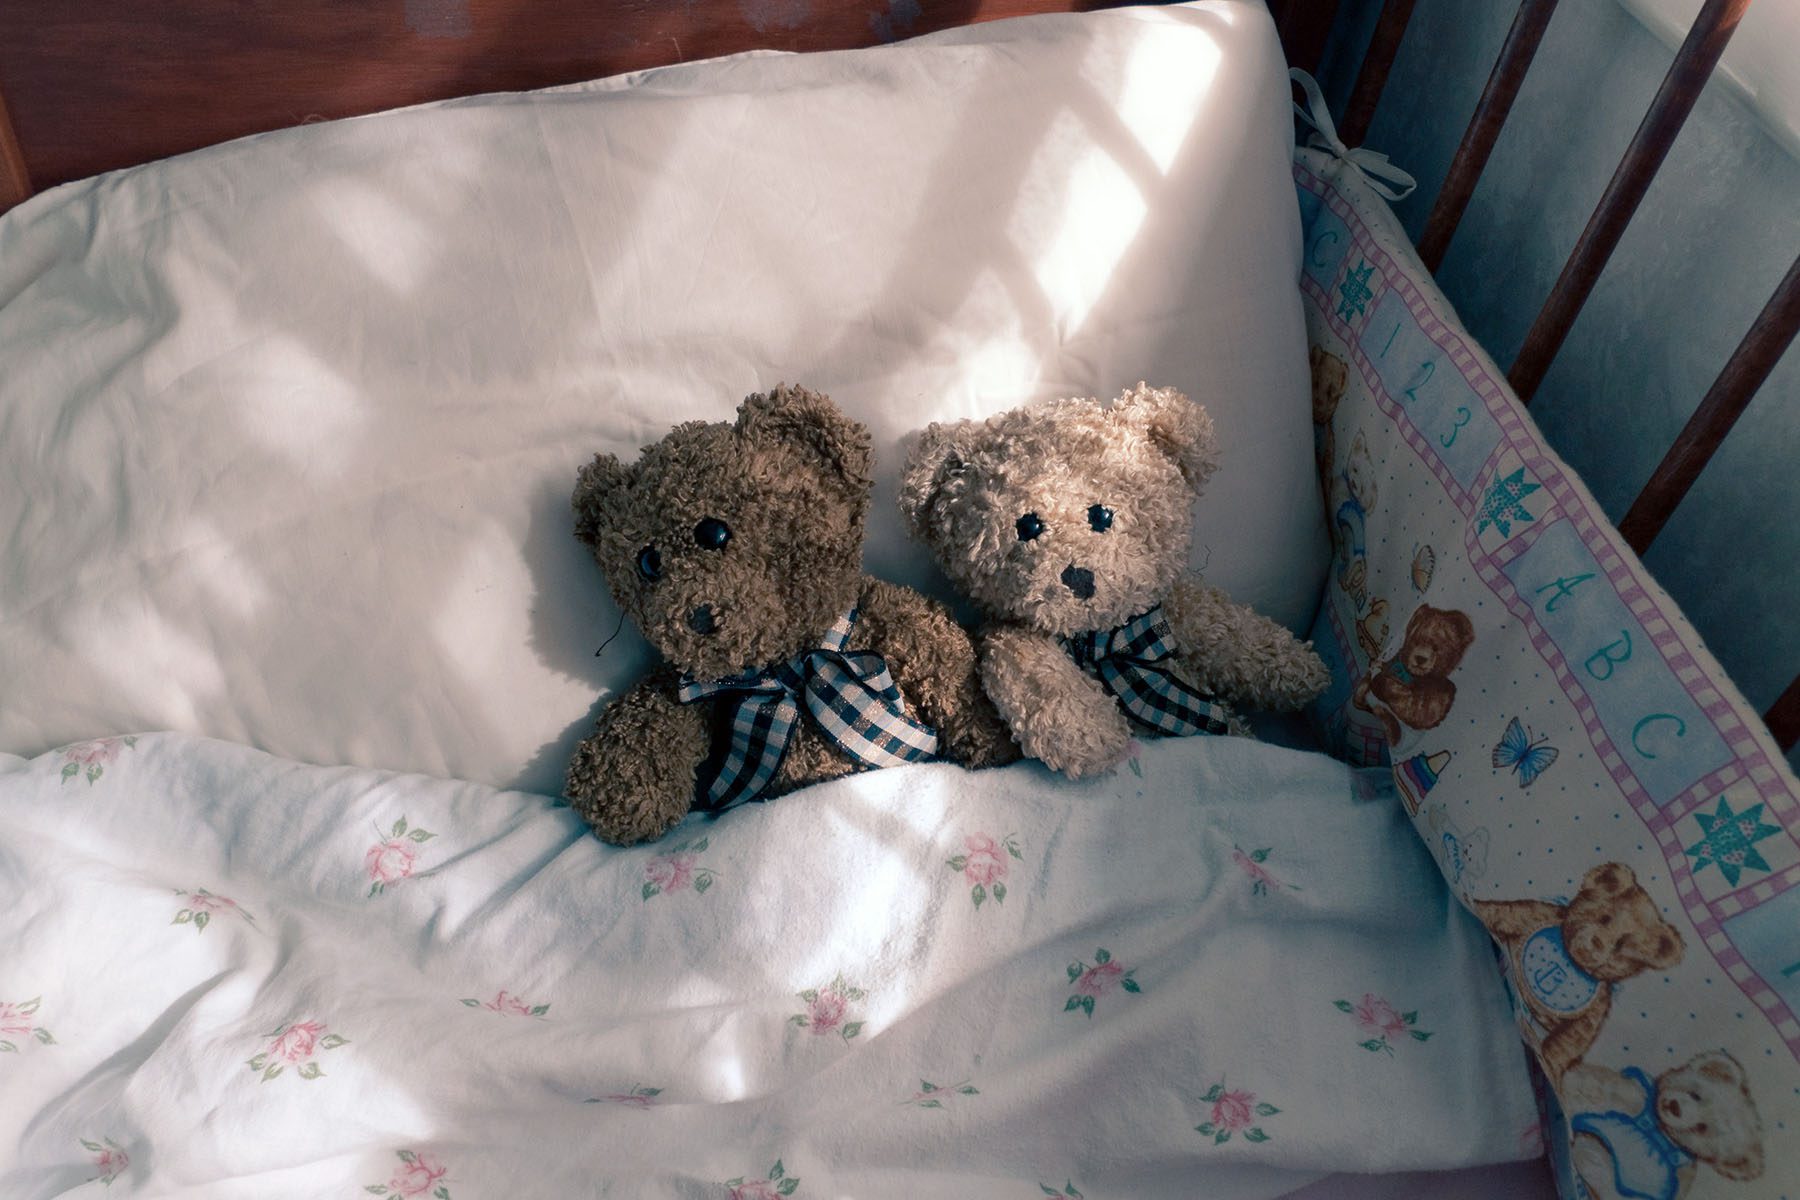 Two teddybears tucked in to a toddler's crib with a crib bumper.